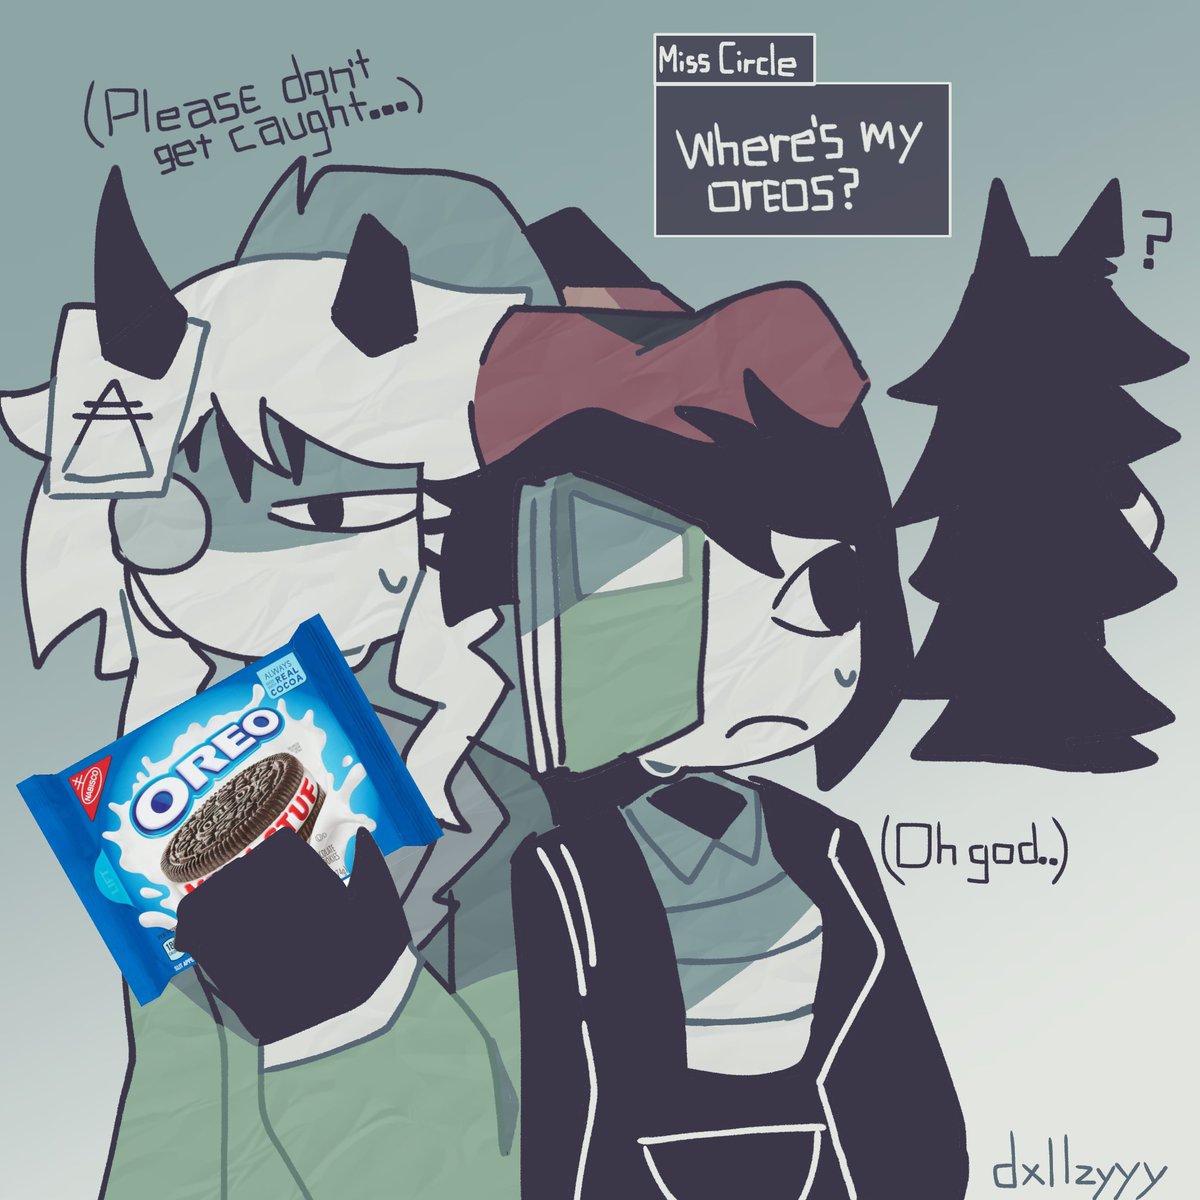 Miss Emily and Miss Grace Stealing Oreos🤫🤫 (Got this idea from a website) credits:@/A3DGhost #fundamentalpapereducation